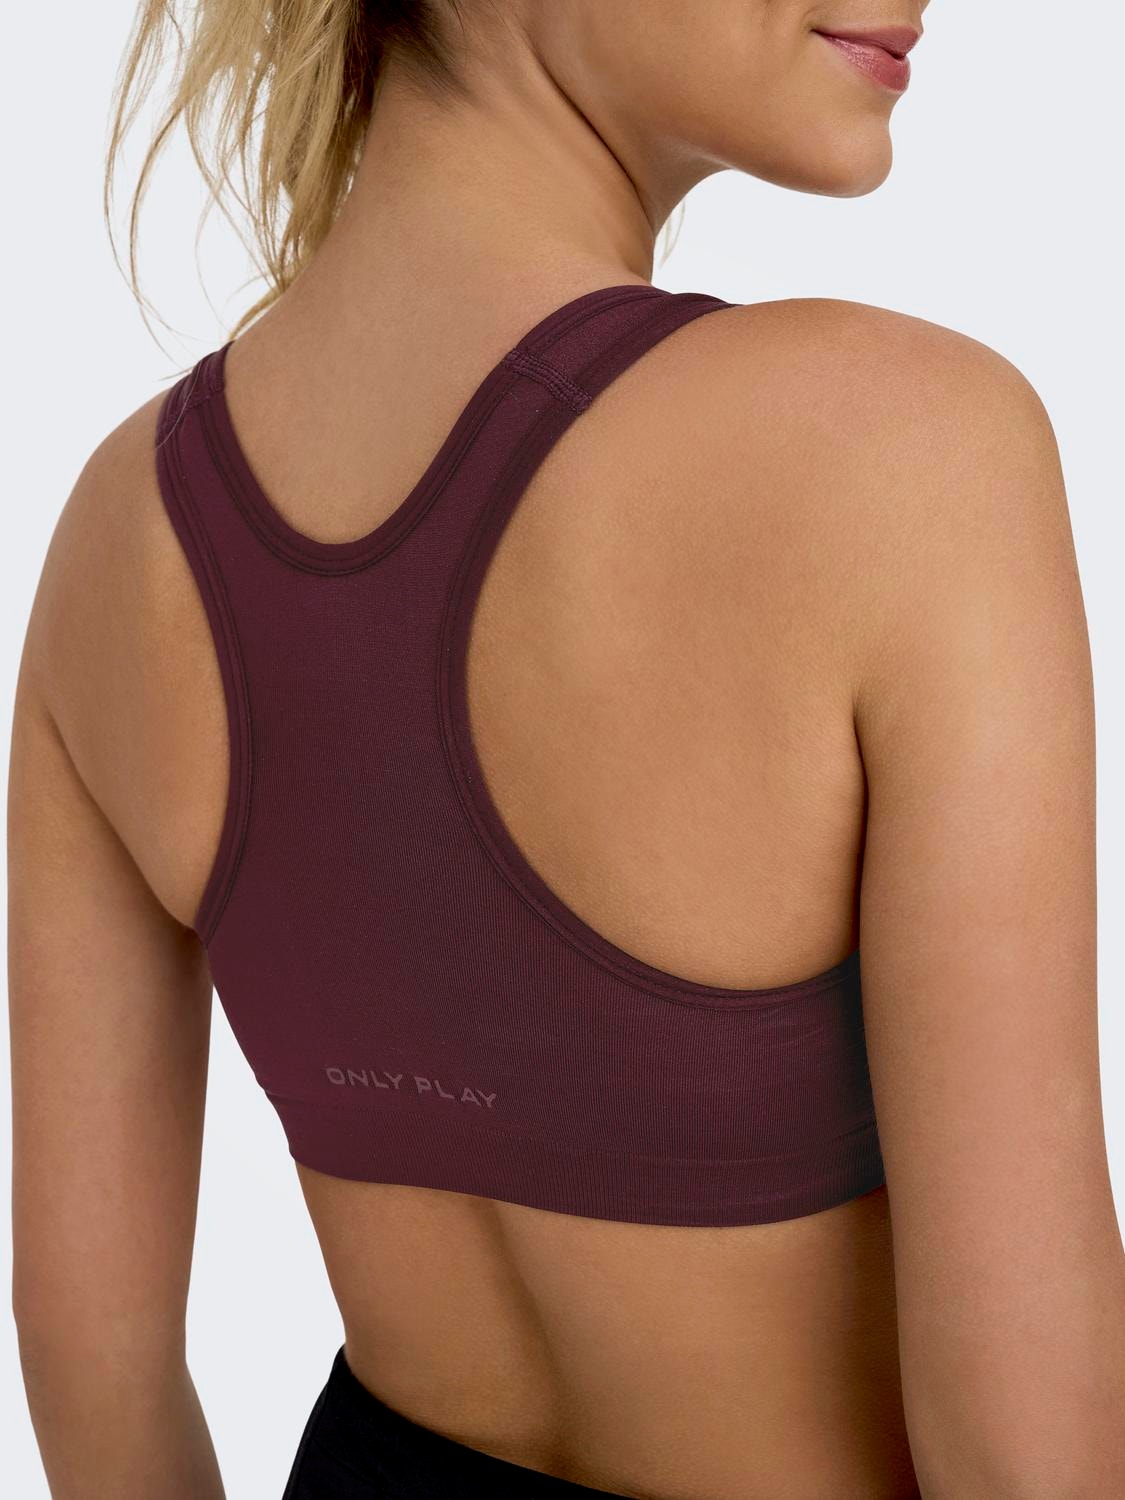  today only clearance womens clothes Womens Sports Bras